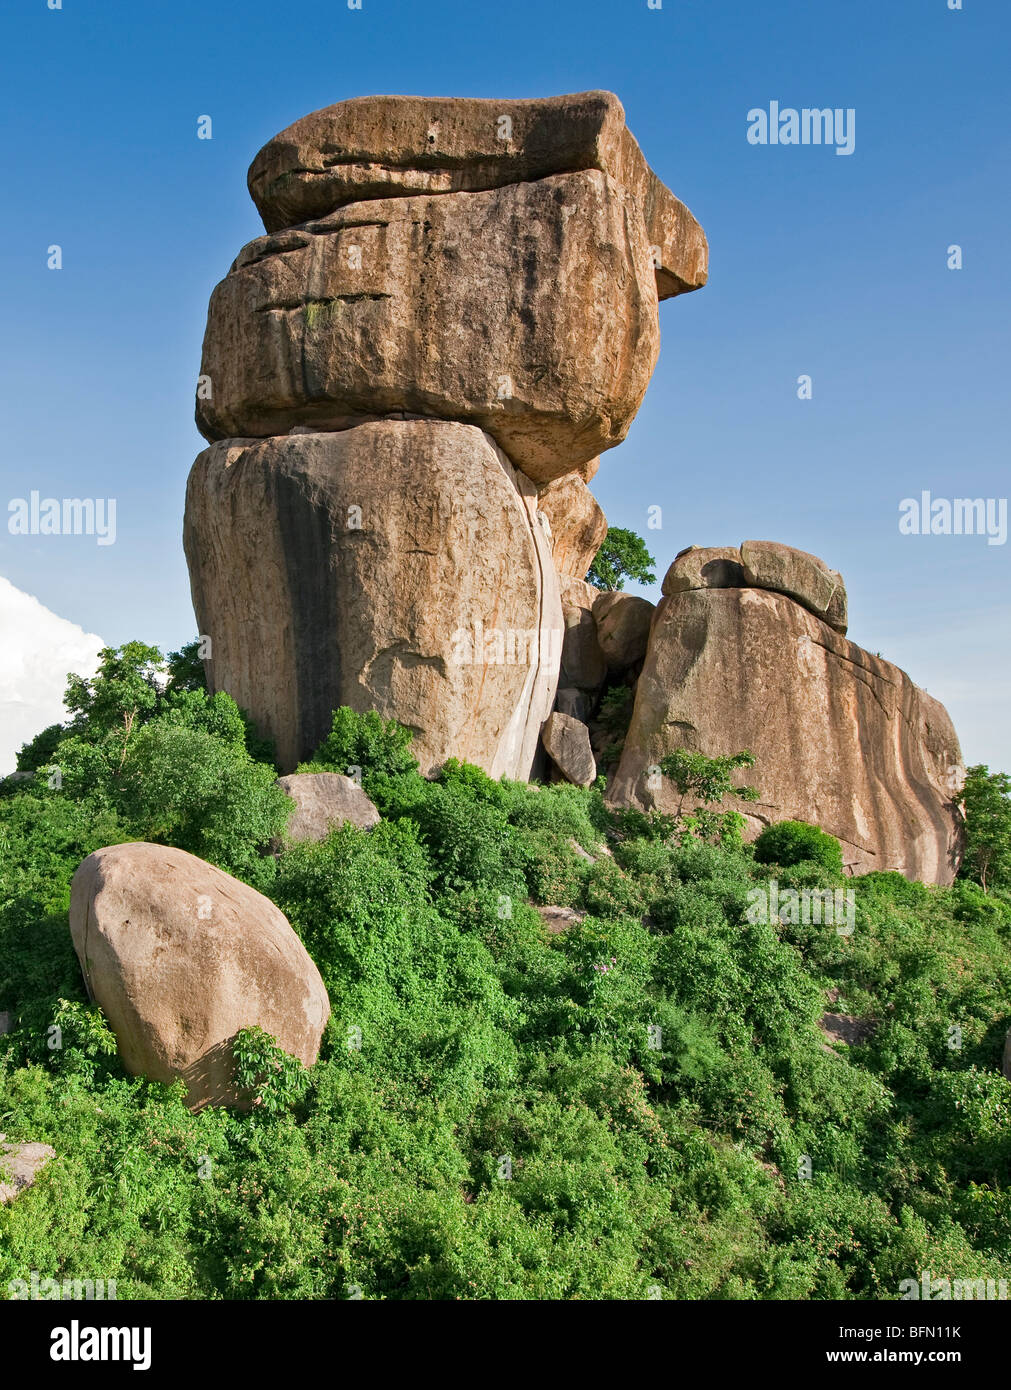 Kenya, Nyanza District. Kit Mikayi, a rock cluster standing some 80 metres high, important site for the  Luo community. Stock Photo